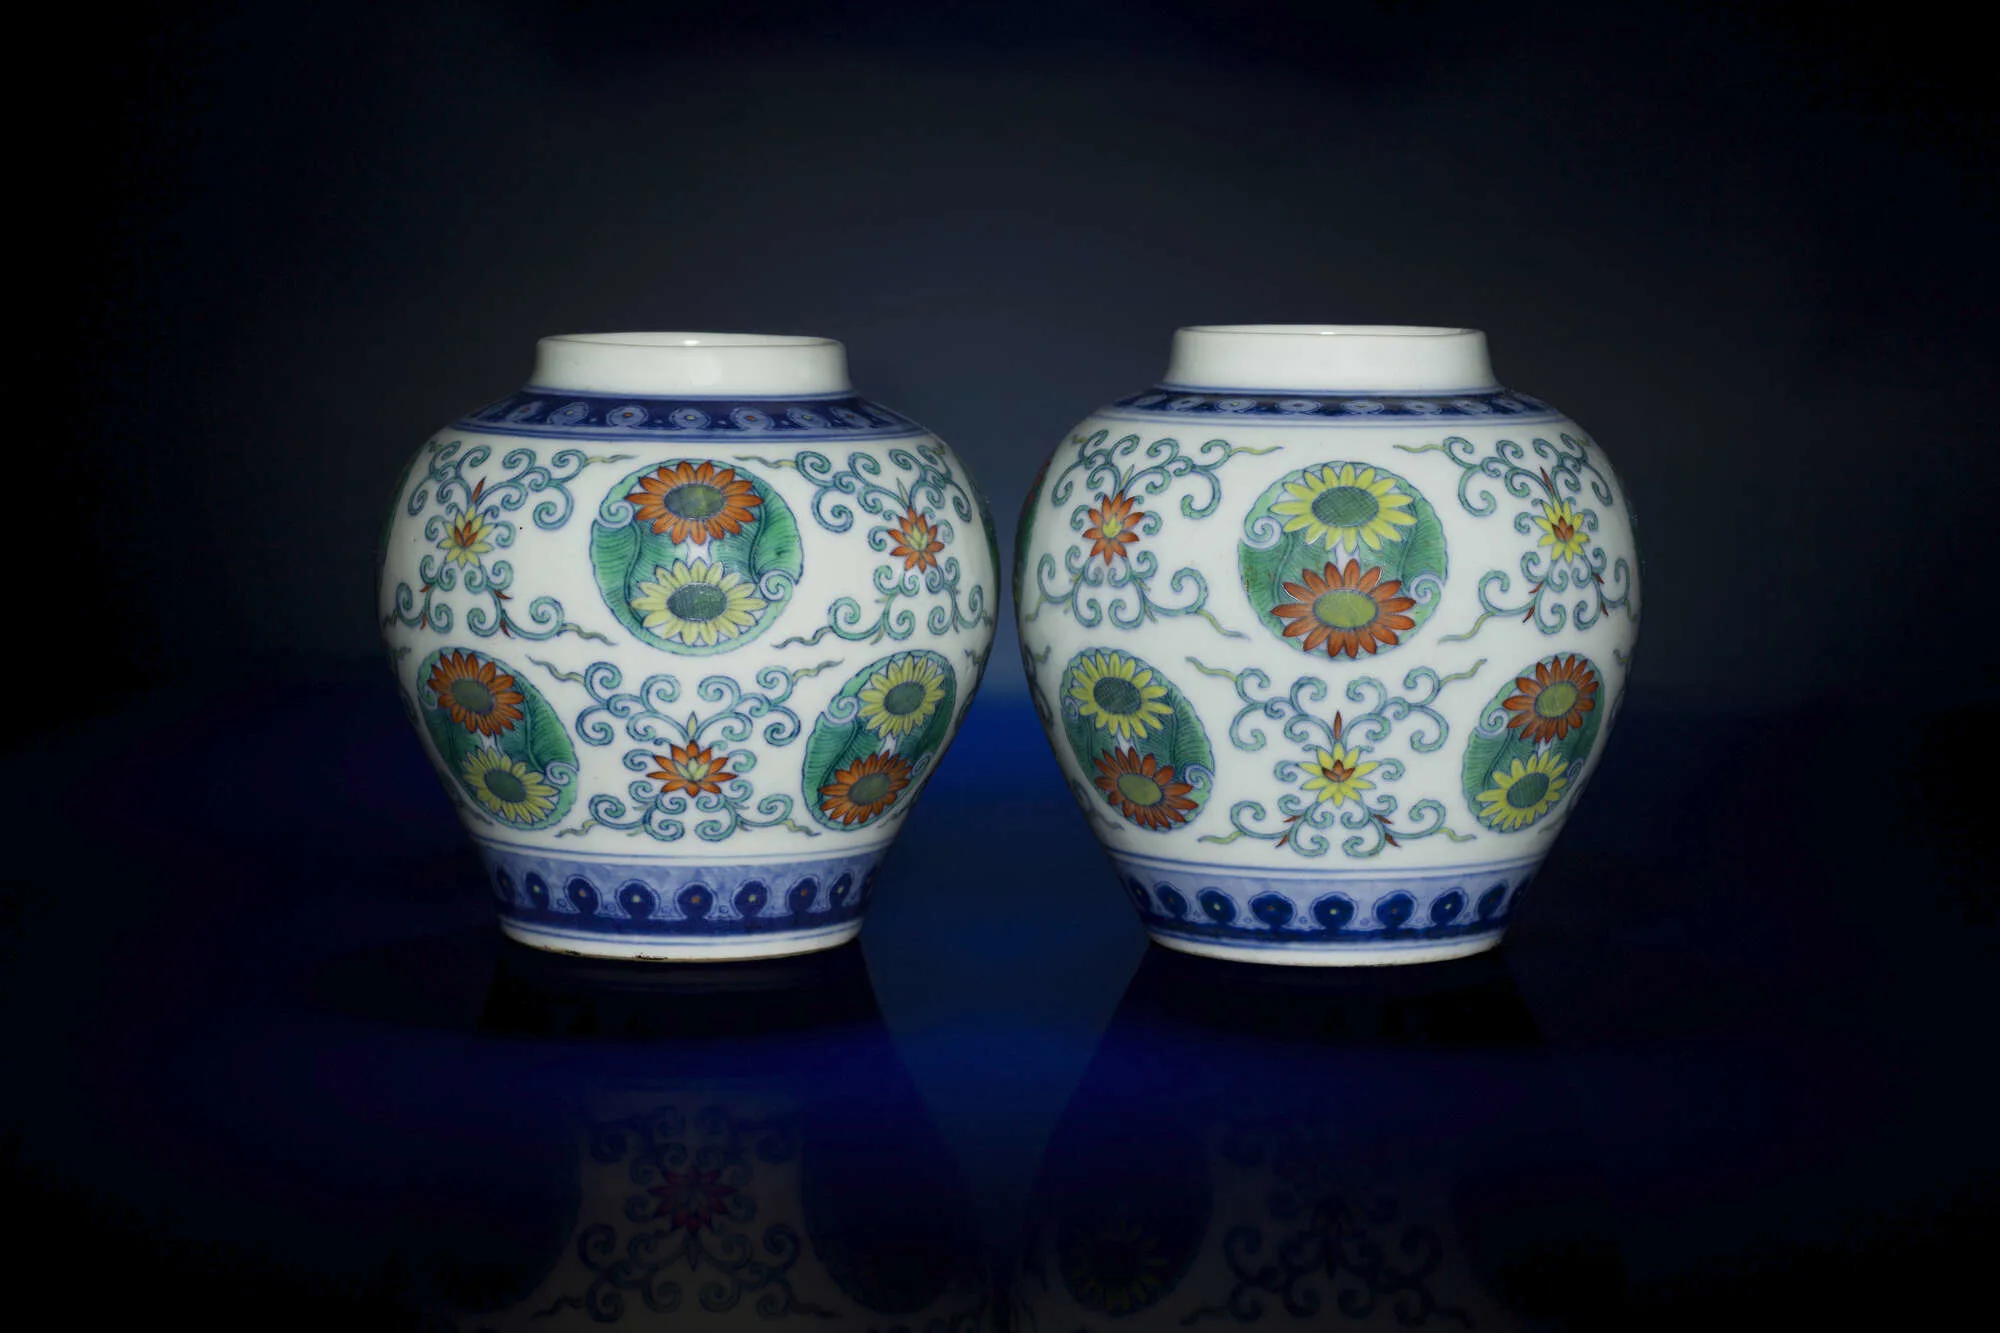 The Qing dynasty jars sold for more than $74,000.